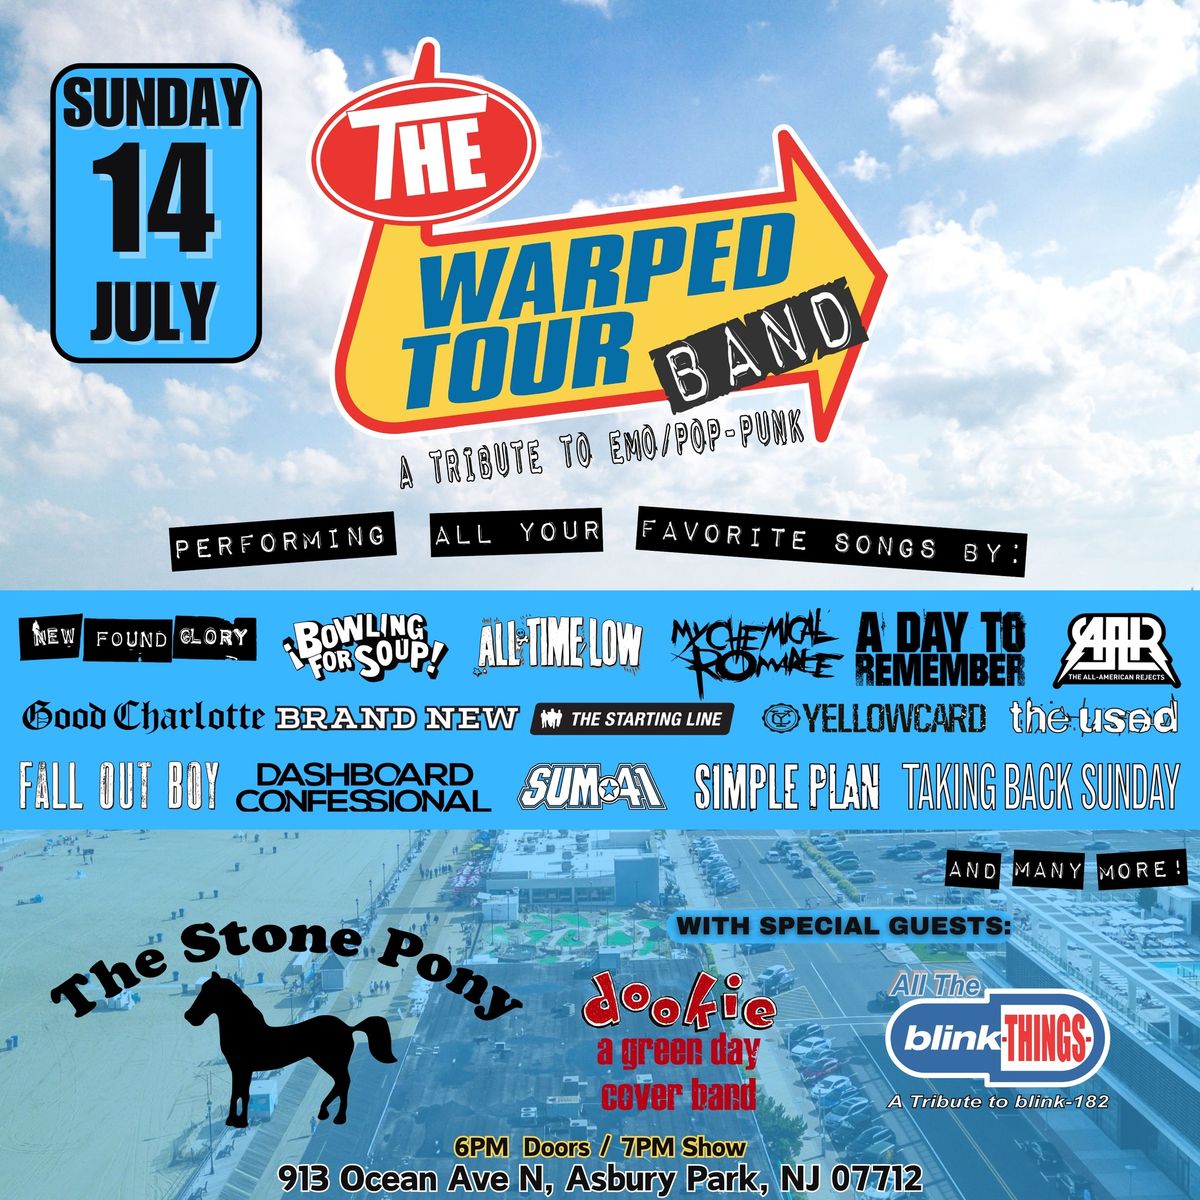 The Warped Tour Band & friends - Stone Pony